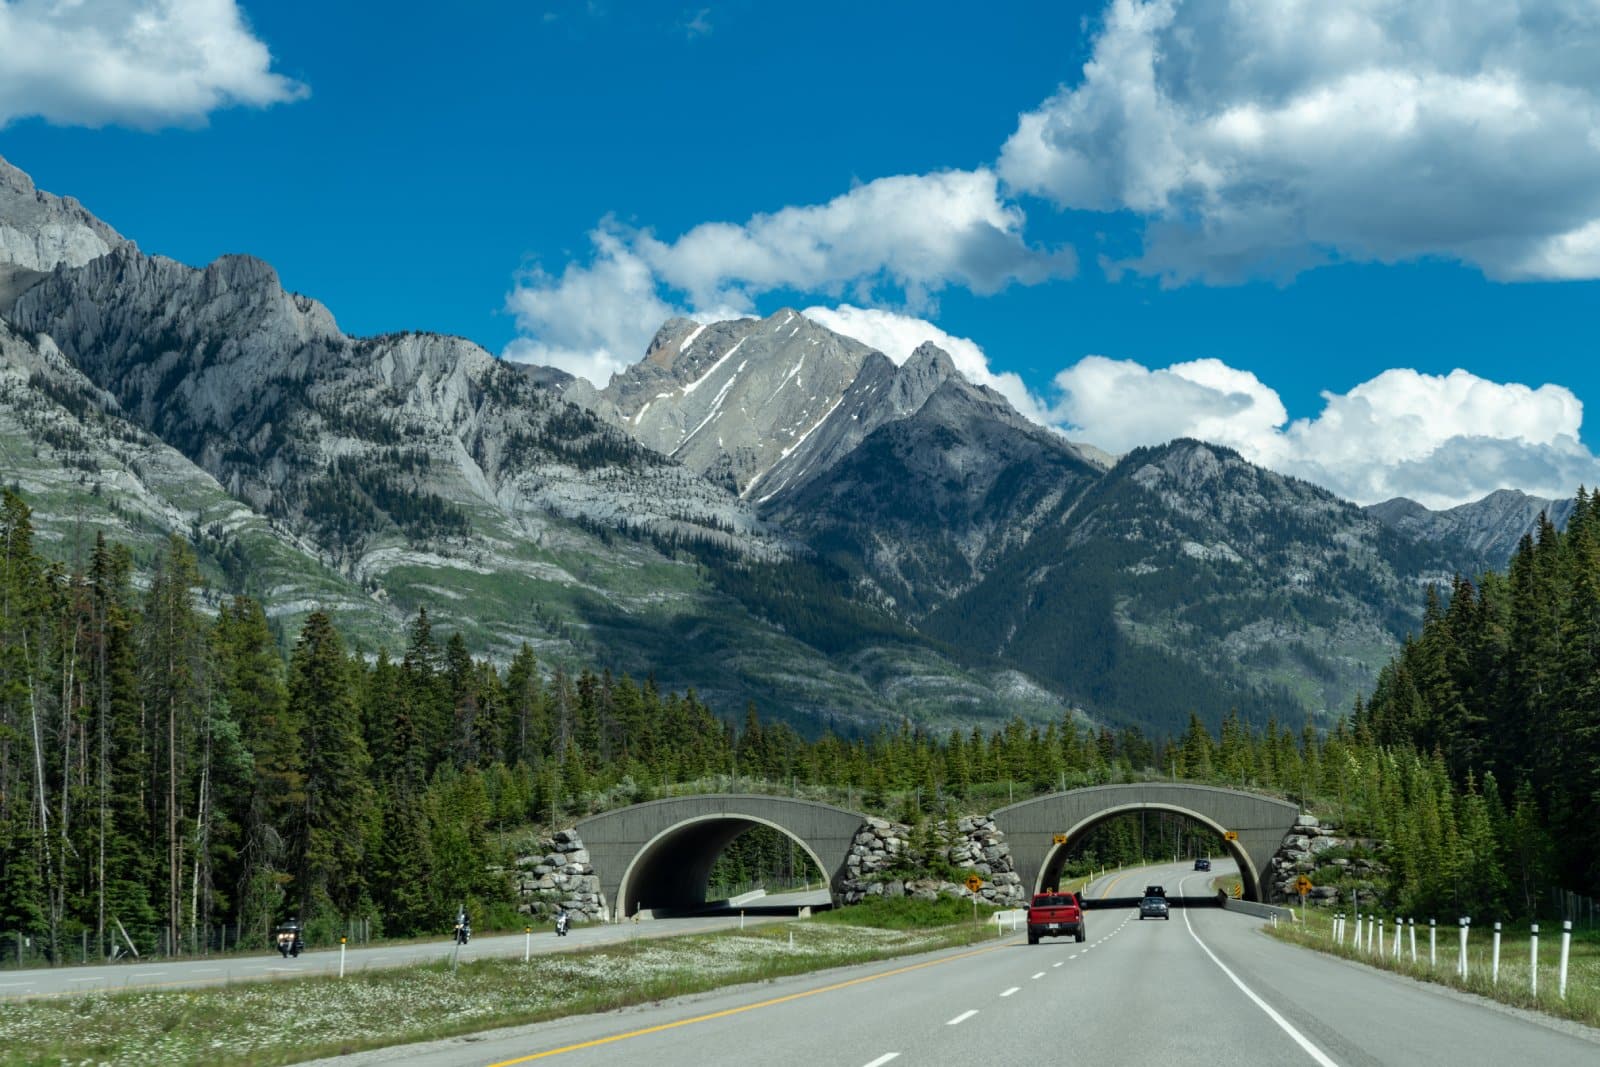 <p class="wp-caption-text">Image Credit: Shutterstock / melissamn</p>  <p><span>Canada’s epic cross-country journey showcases the vastness and diversity of the country, from vibrant cities to untouched wilderness.</span></p>